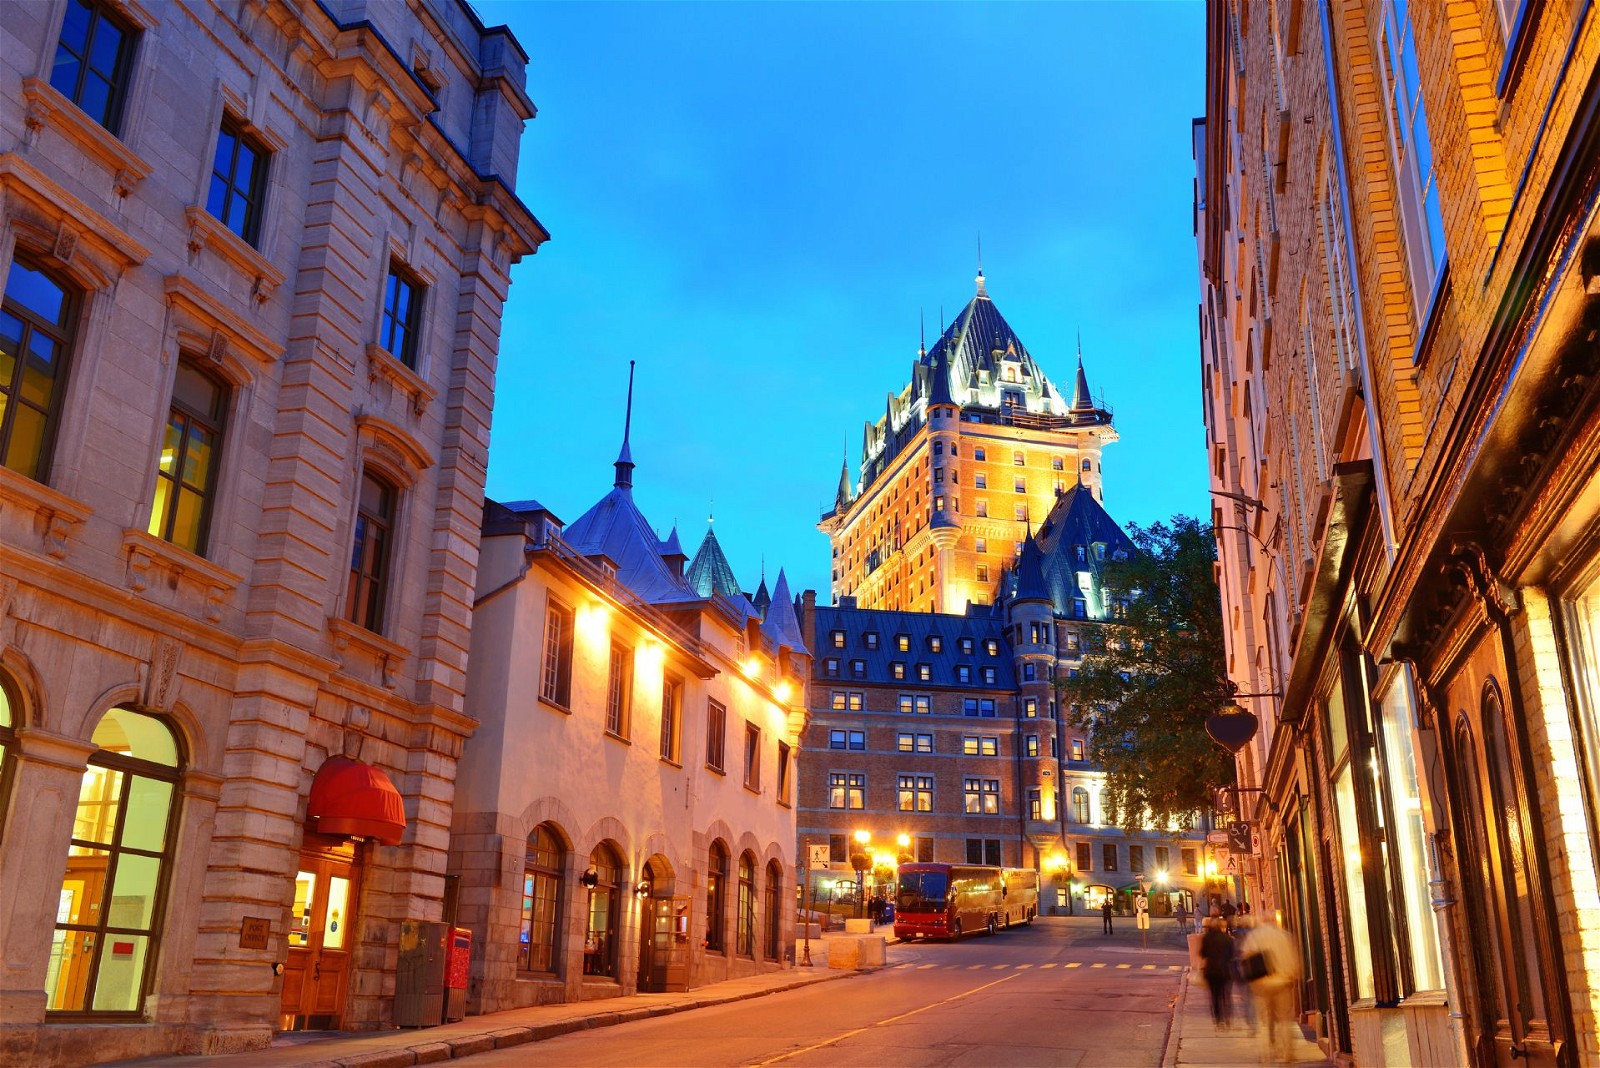 Old Quebec is a UNESCO World Heritage Site located in the province of Quebec. May is a great time to visit, as the weather is mild and the crowds are still manageable. Explore the historic district, visit the Chateau Frontenac, or take a stroll along the St. Lawrence River.